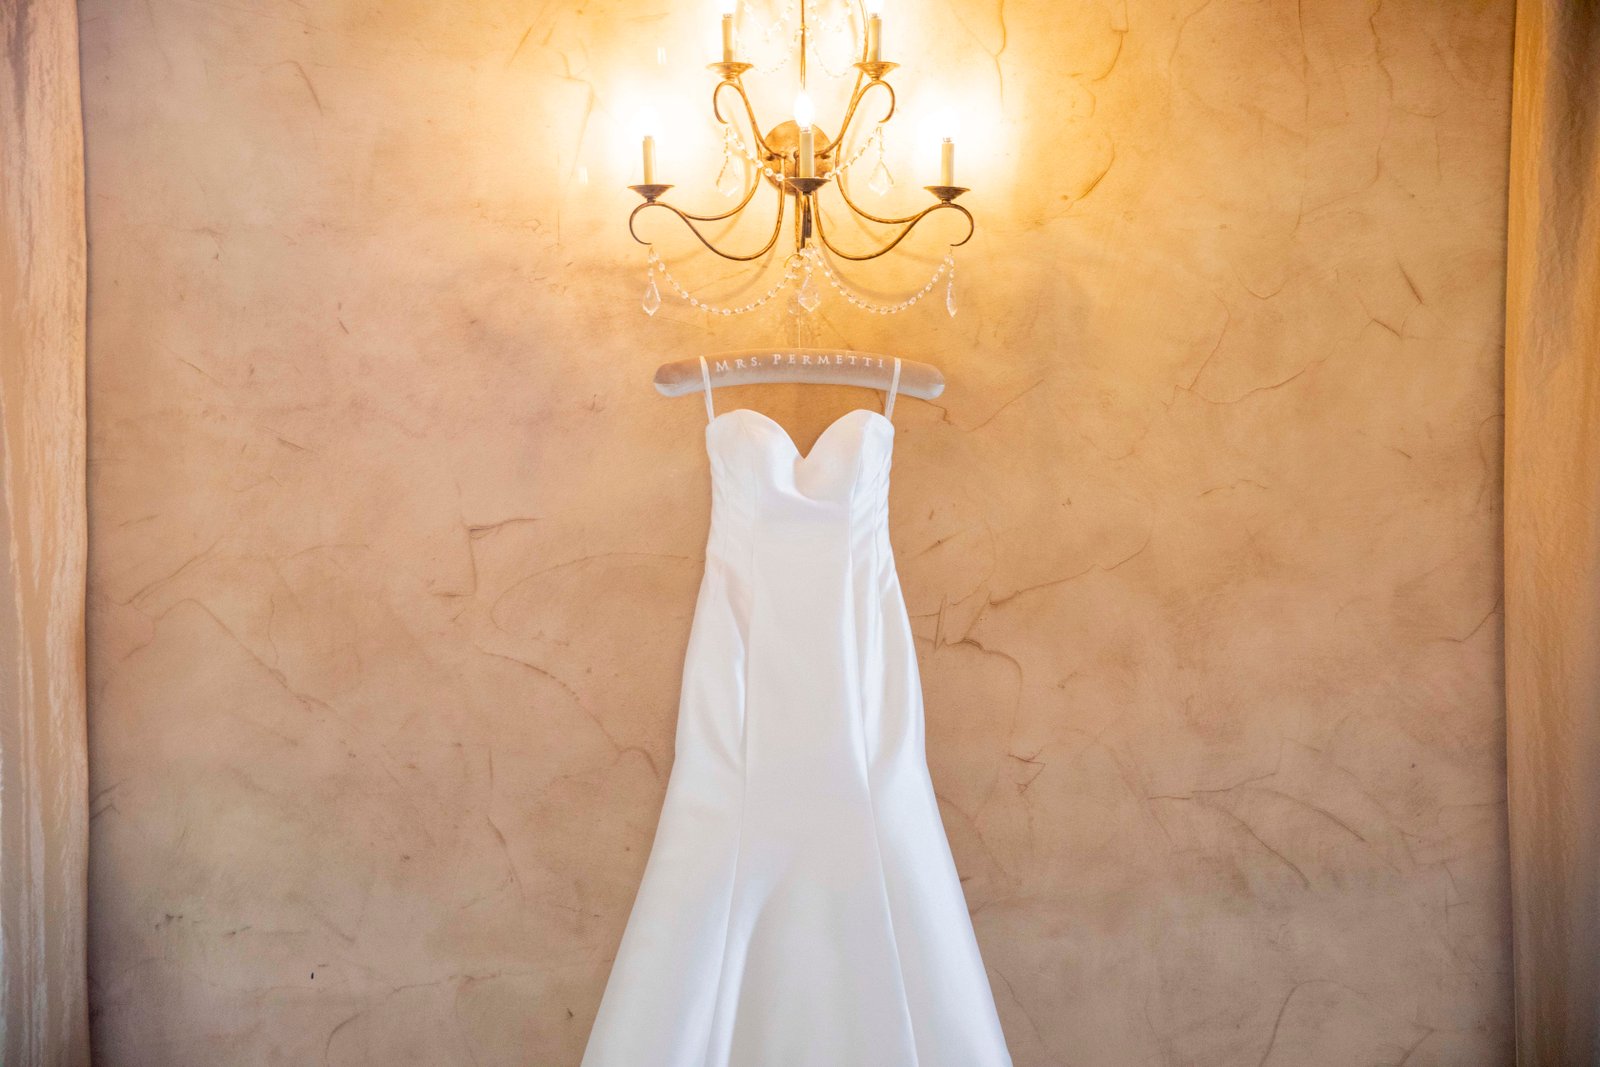 wedding dress hanging from a wall sconce